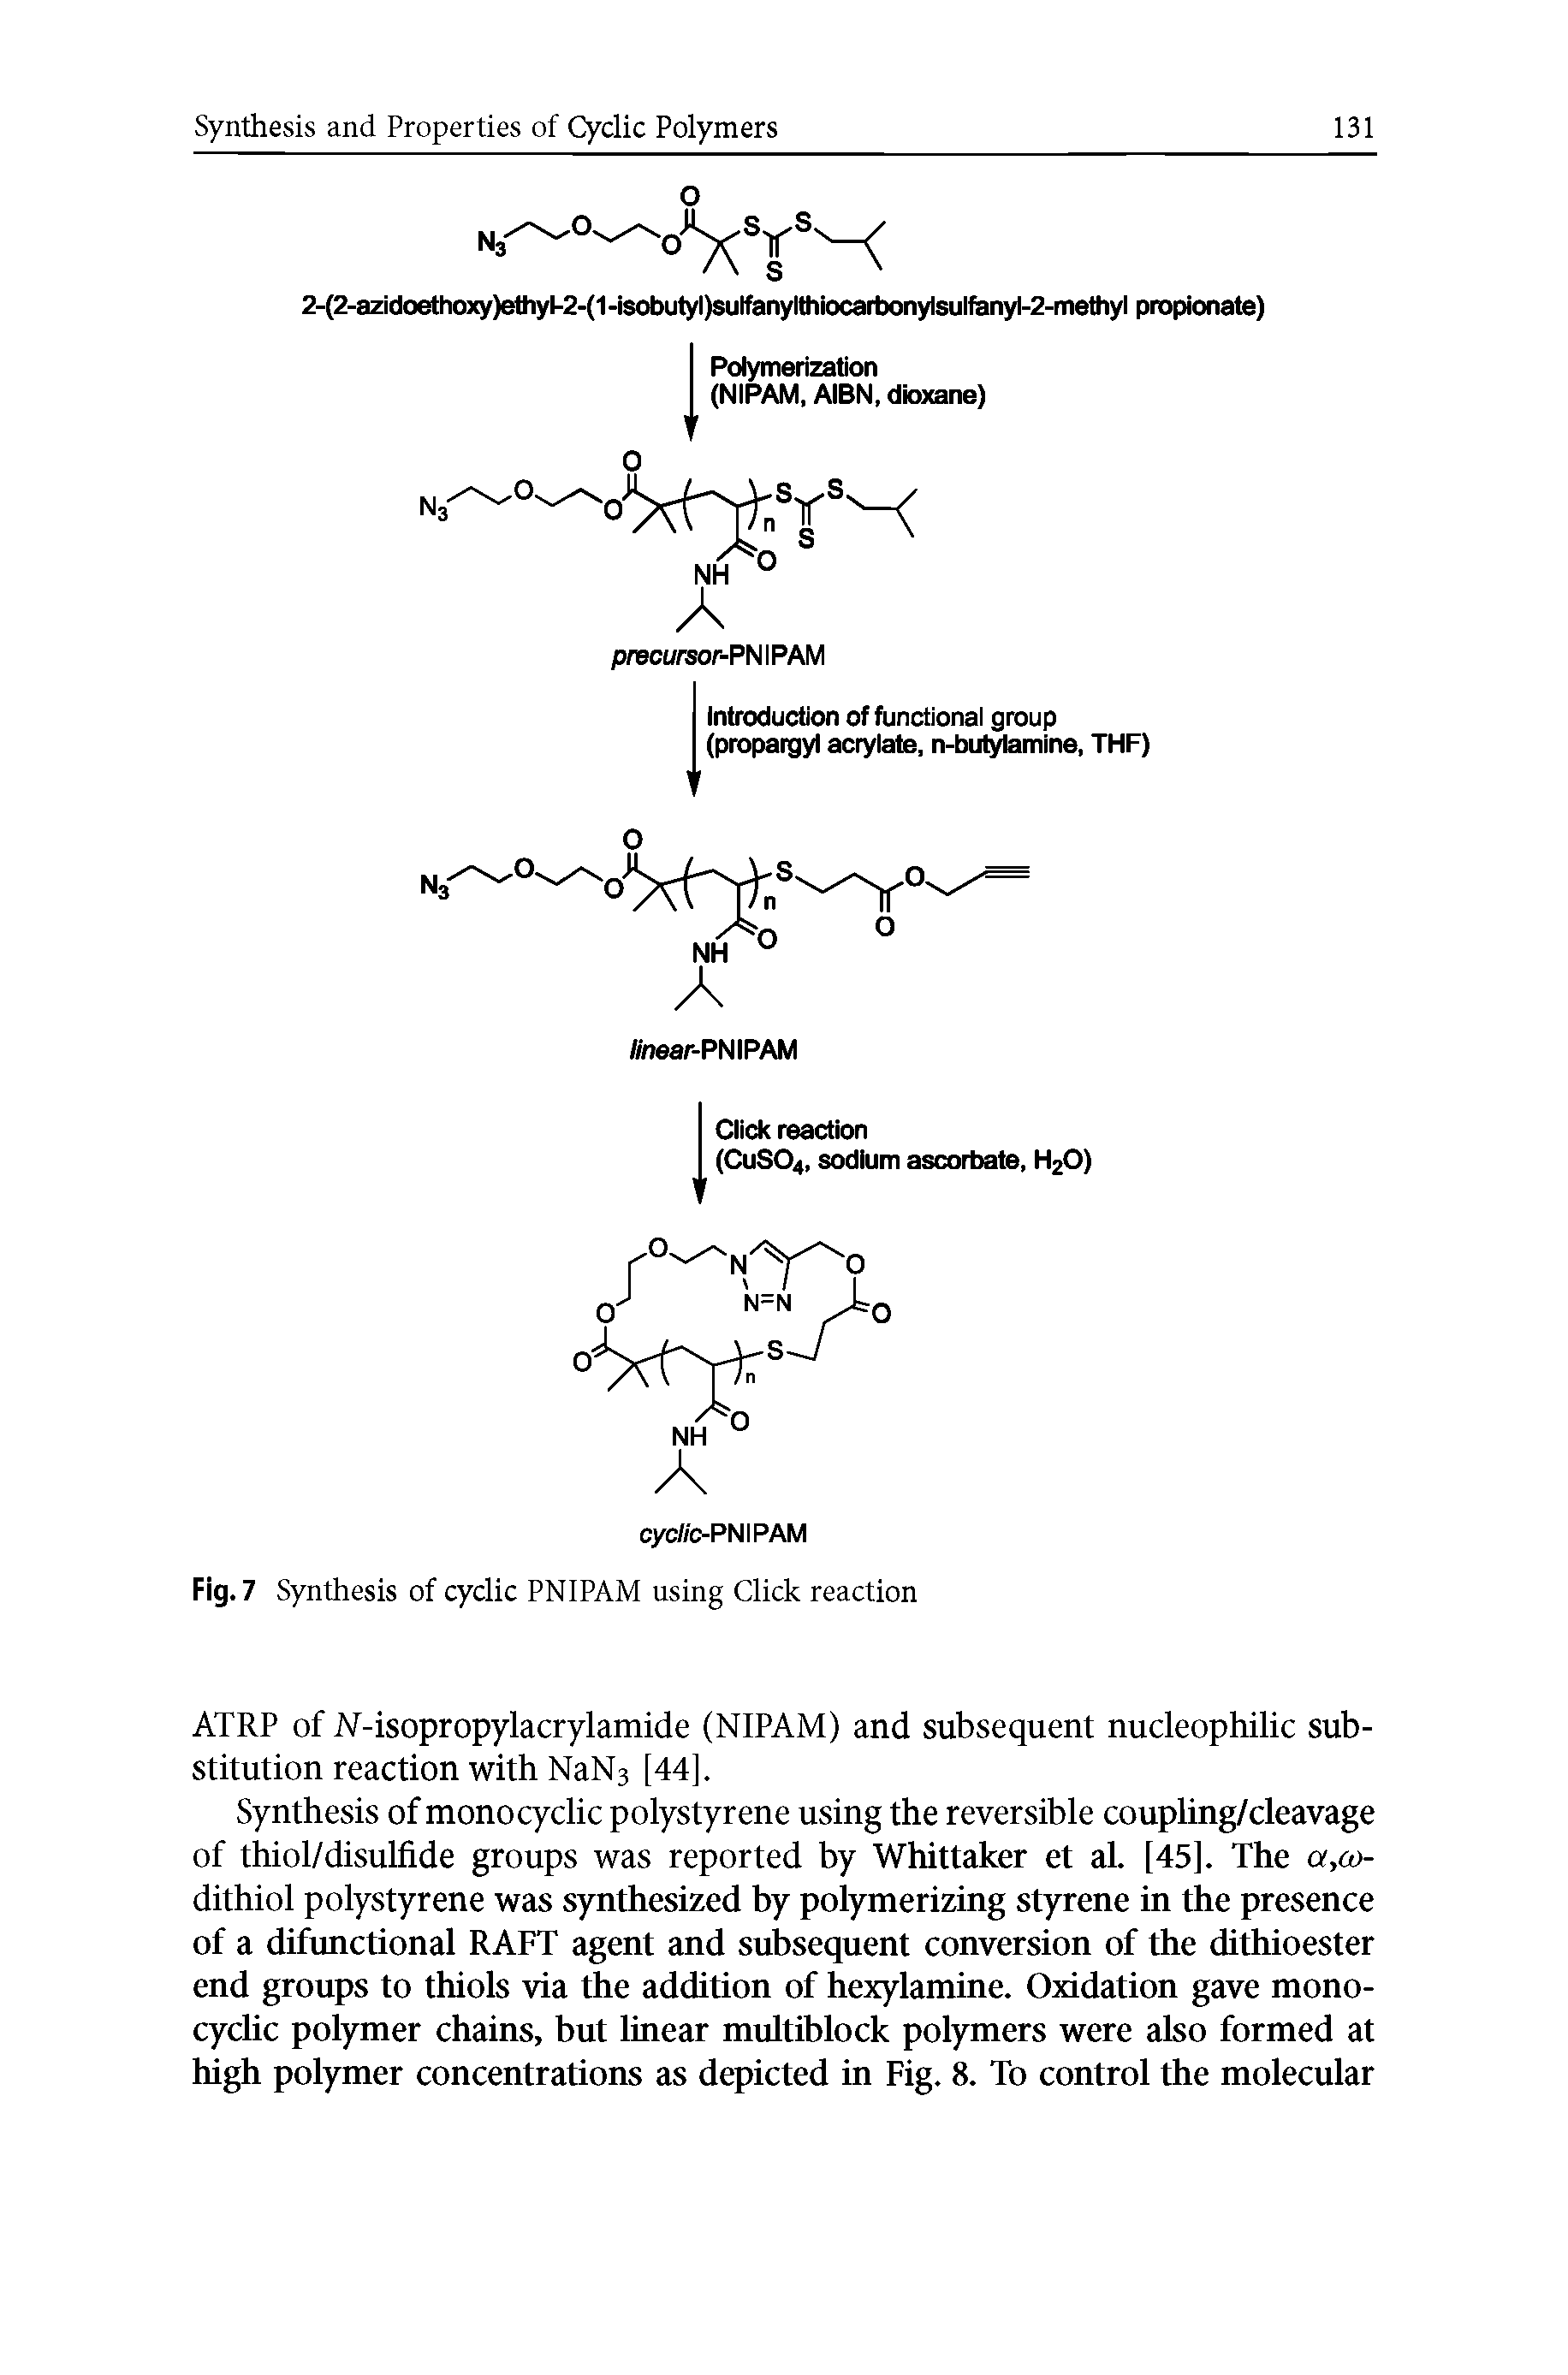 Fig. 7 Synthesis of cyclic PNIPAM using Click reaction...